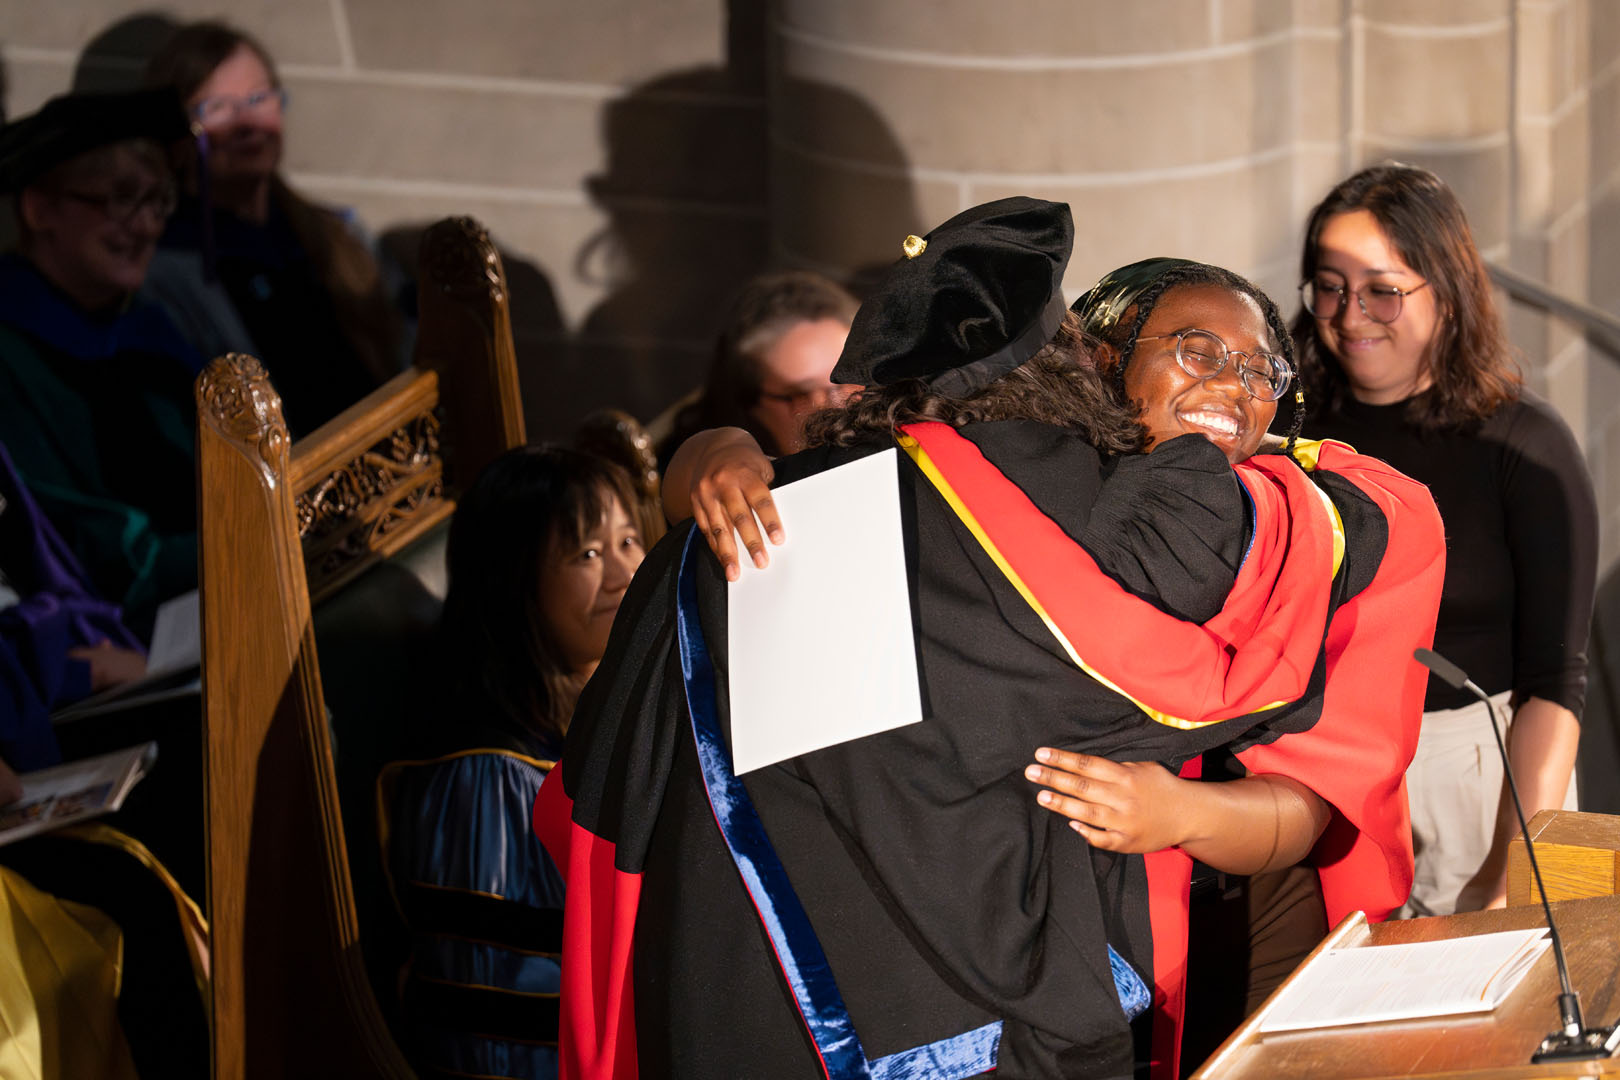 Melanie Barksdale '23 hugs Olivia L. Hatton after receiving the Laboratory Award in Molecular Biology at Honors Convocation on May 16, 2023. Photo by Lonnie Timmons III / Colorado College.